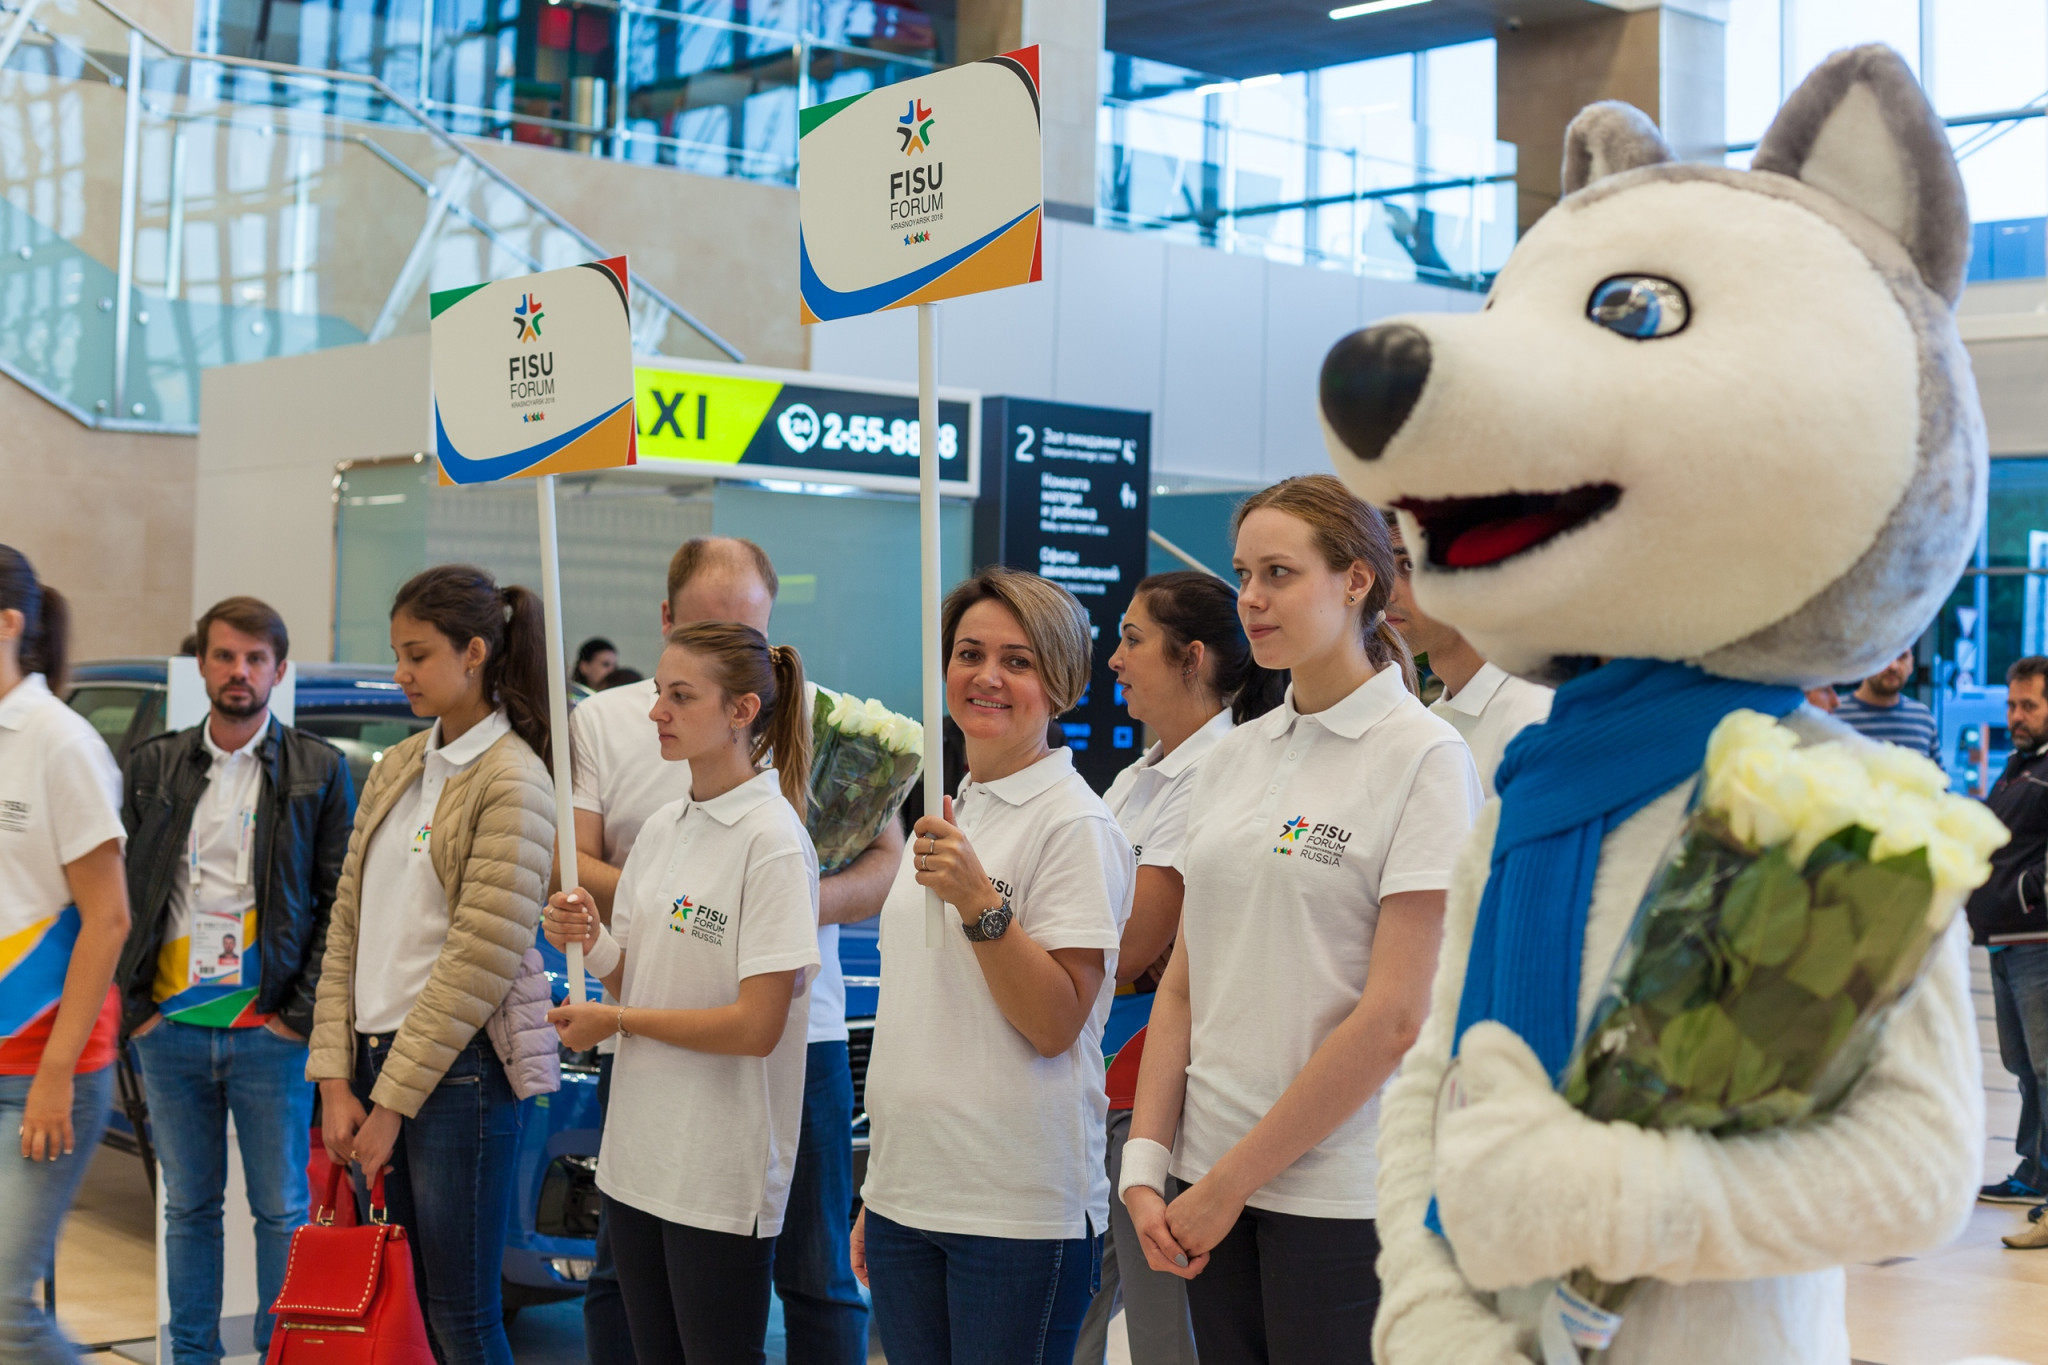 Visitors for the FISU Forum were greeted at the airport ©FISU